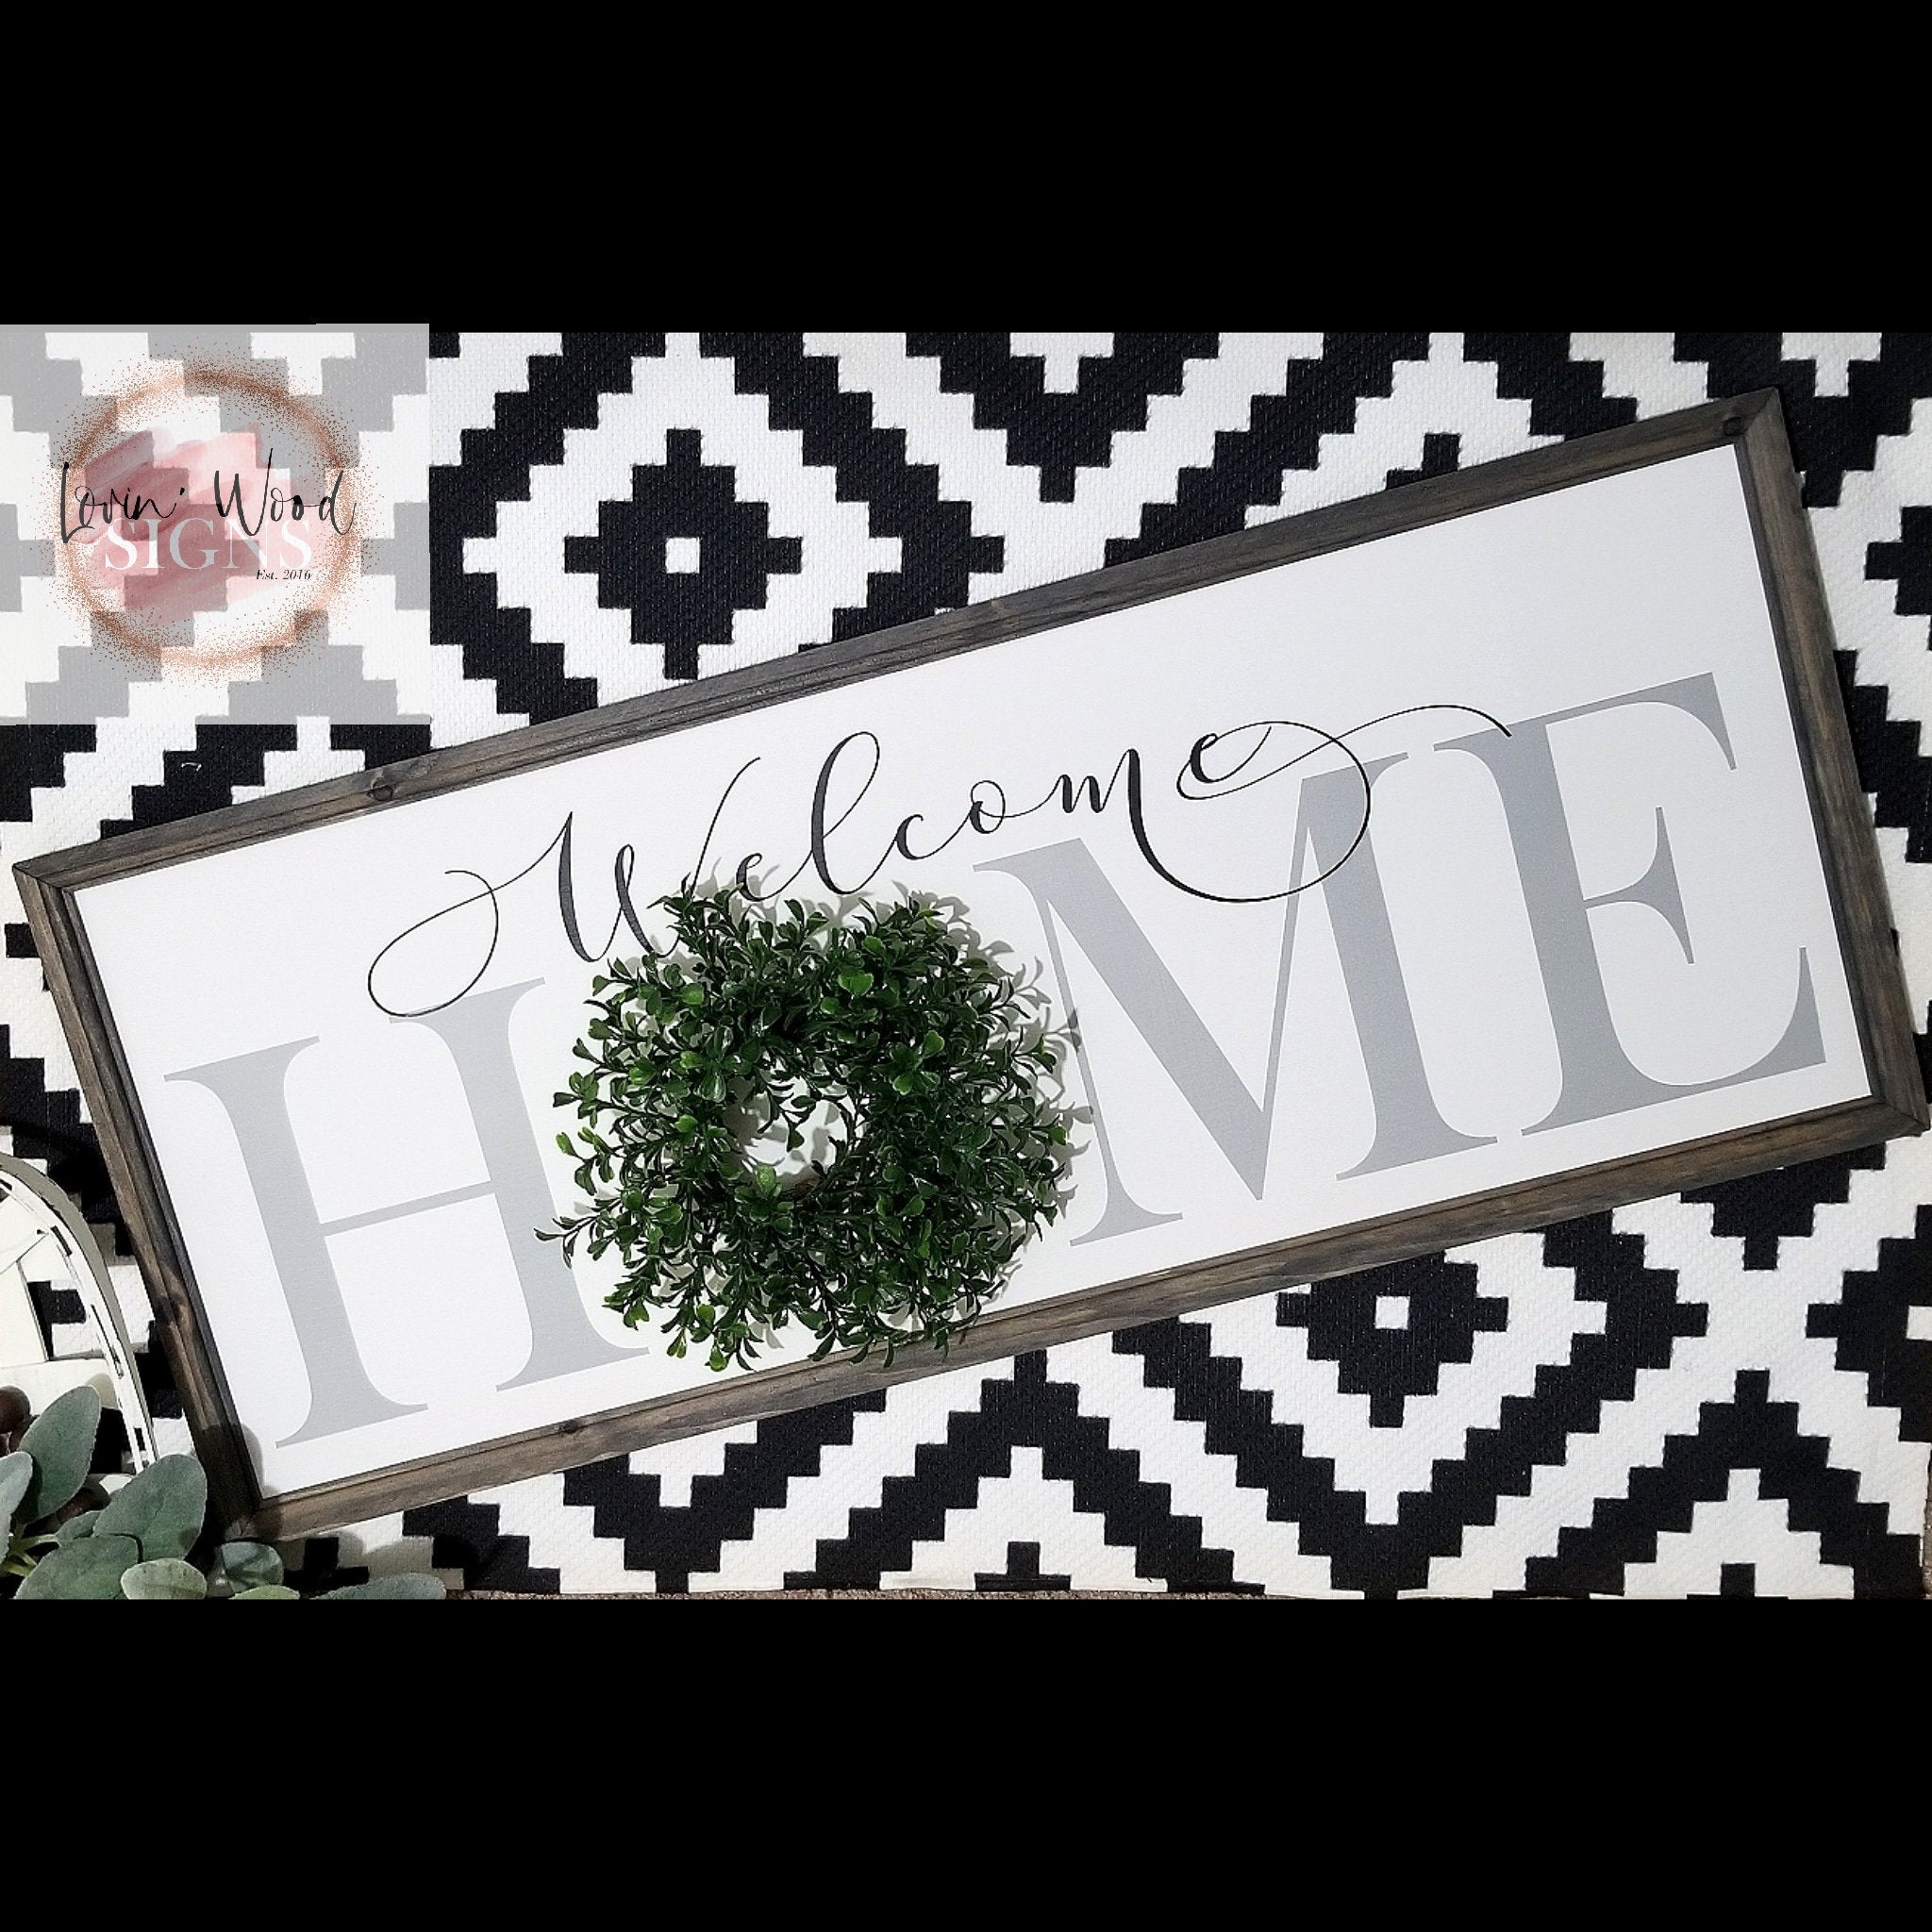 Home sign with wreath